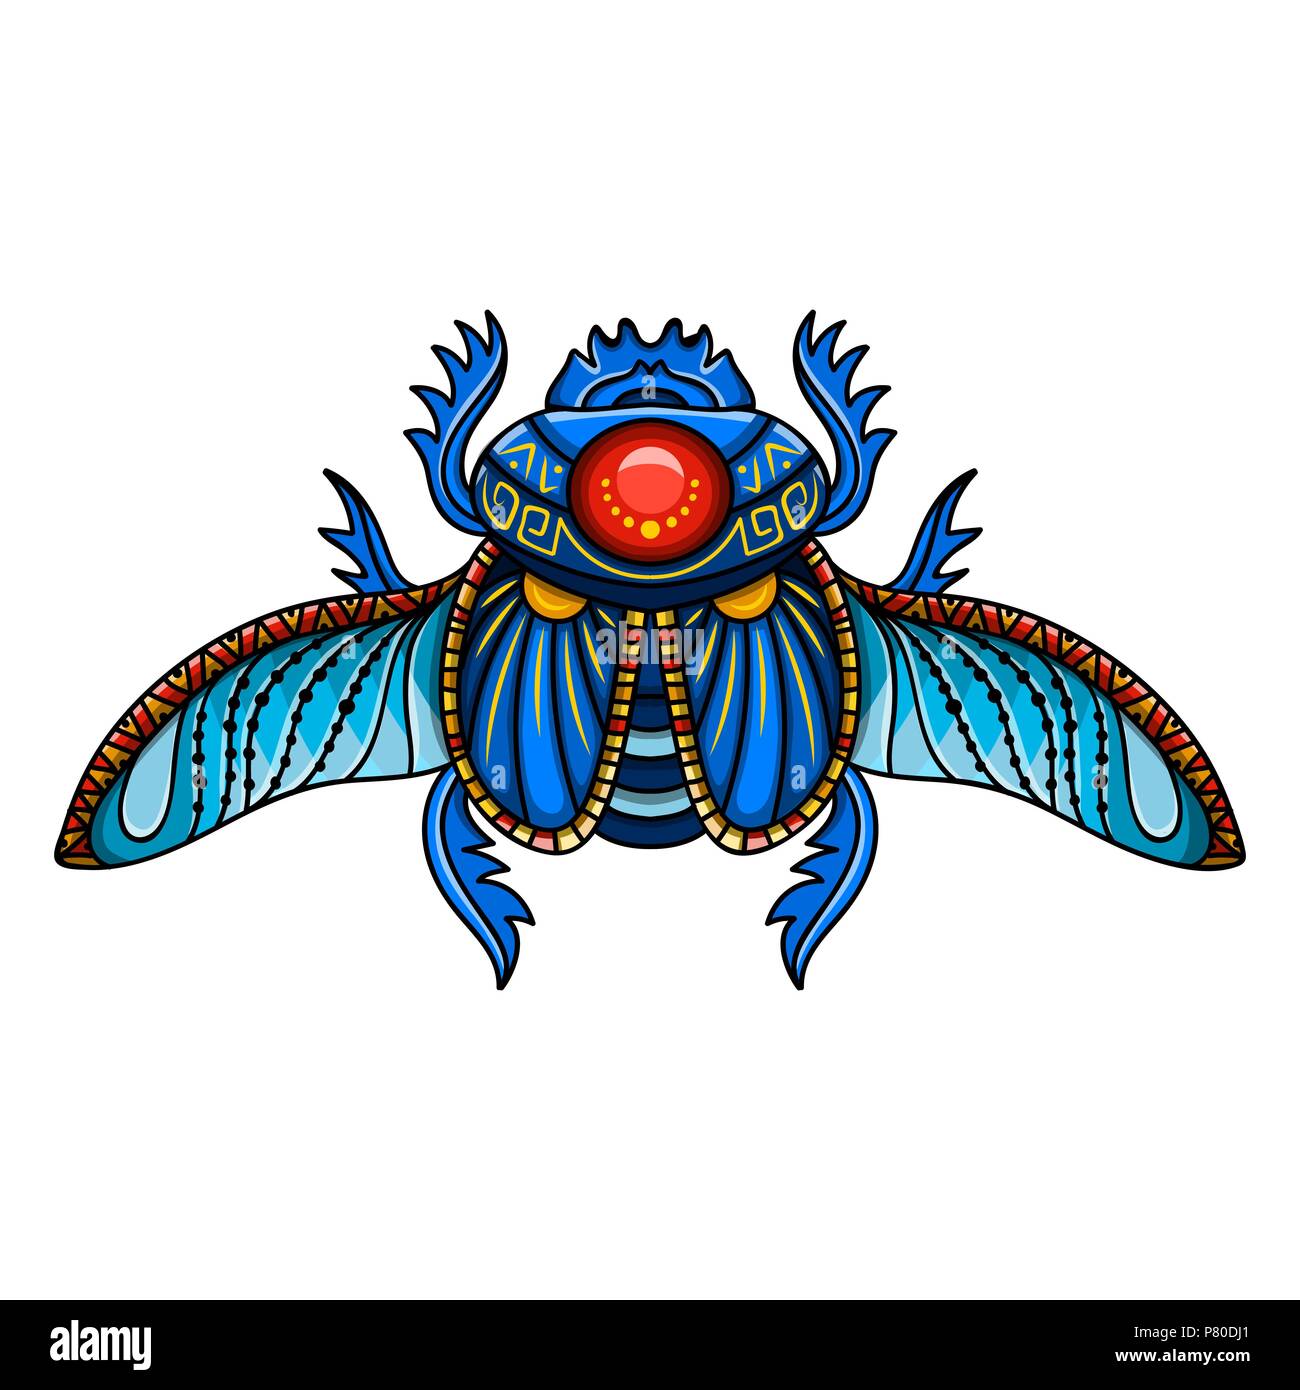 Winged Scarab Tattoo Scarab With Wings Temporary Tattoo   Etsy